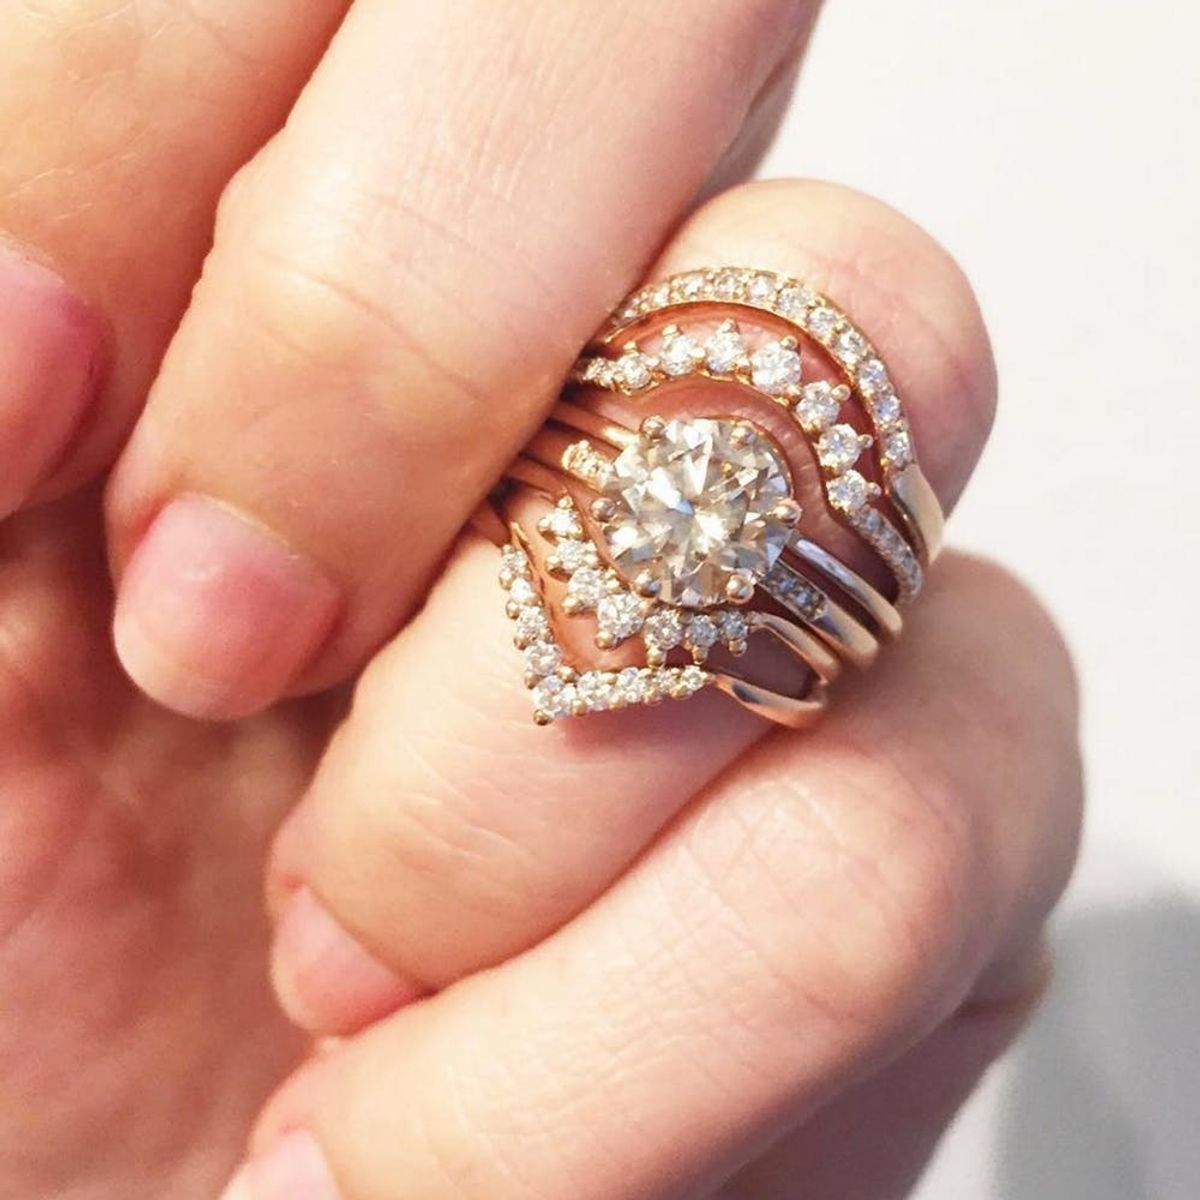 The New Wedding Ring Trend You Need to Know About